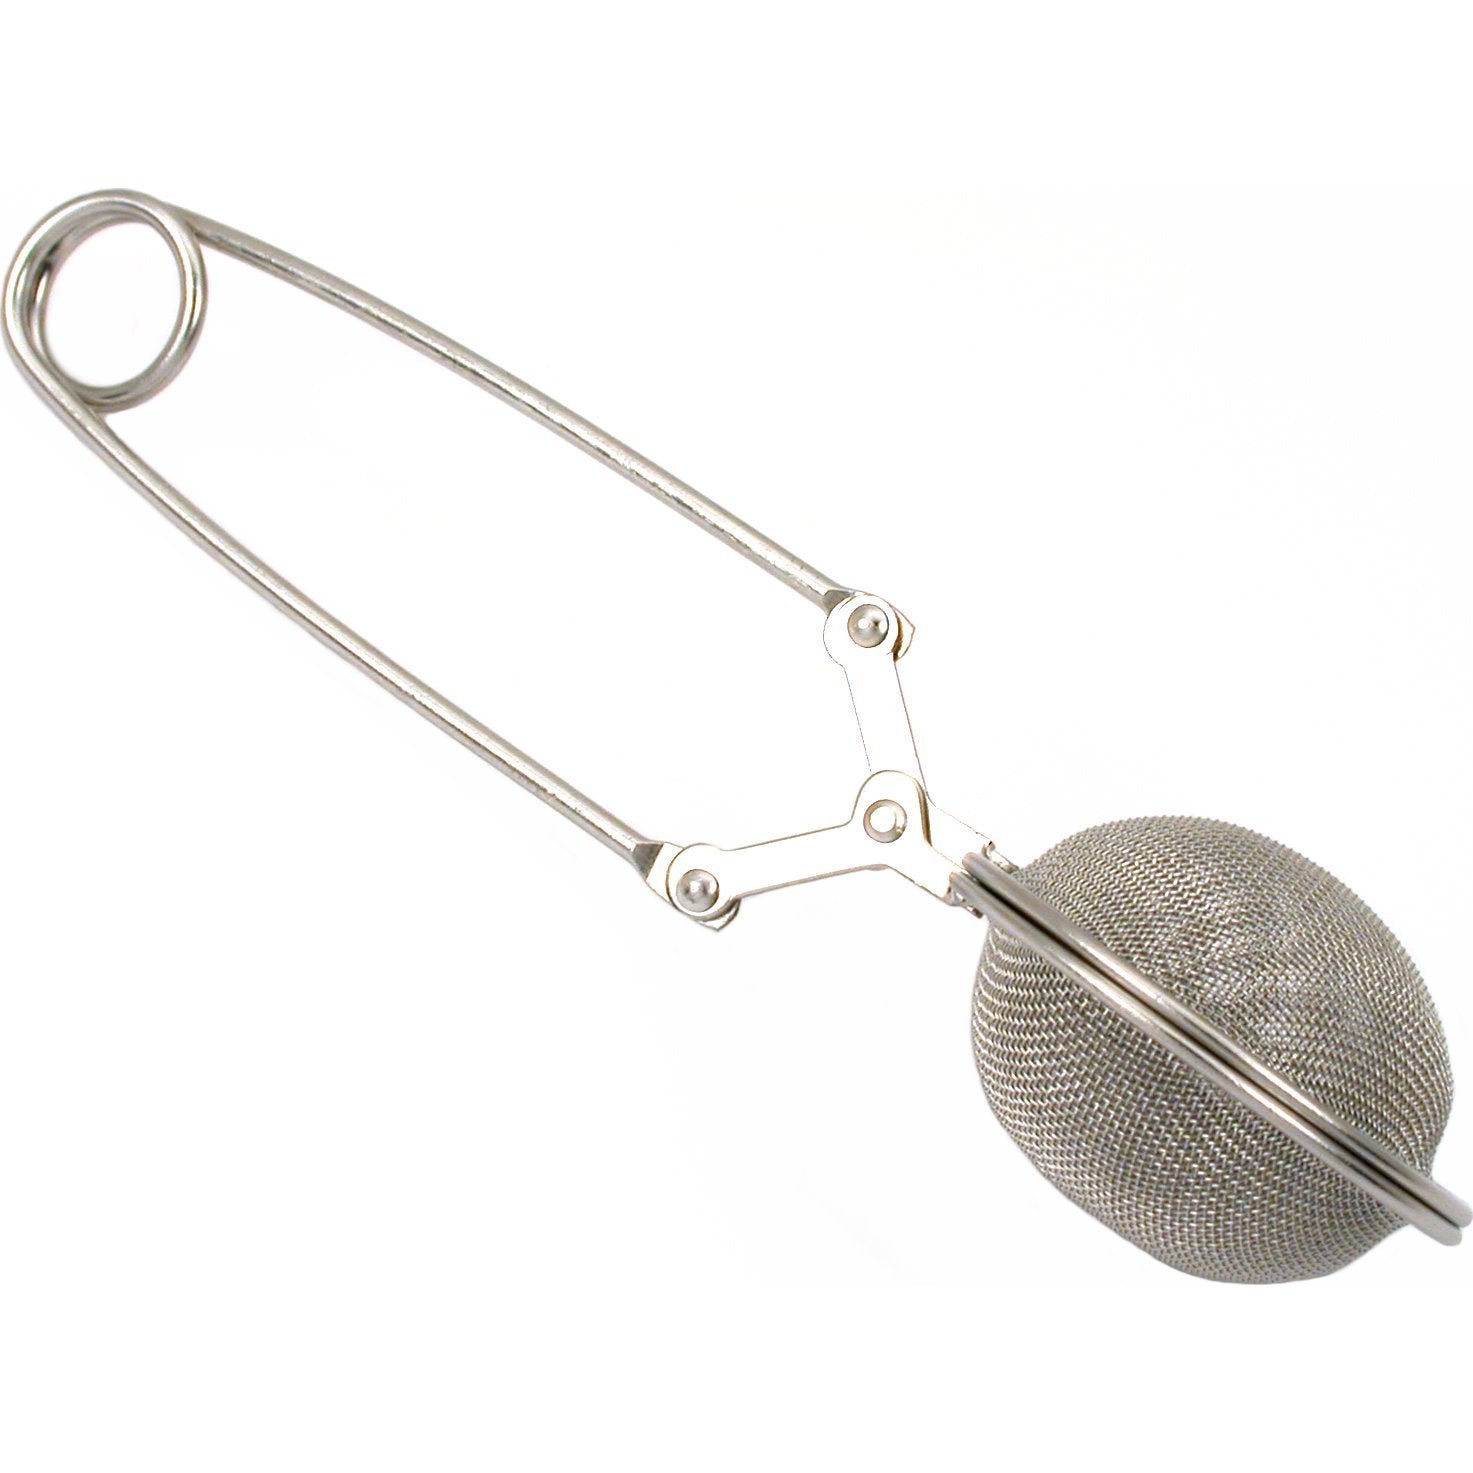 Stainless Steel Stone & Jewelry Capsule Strainer/Infuser